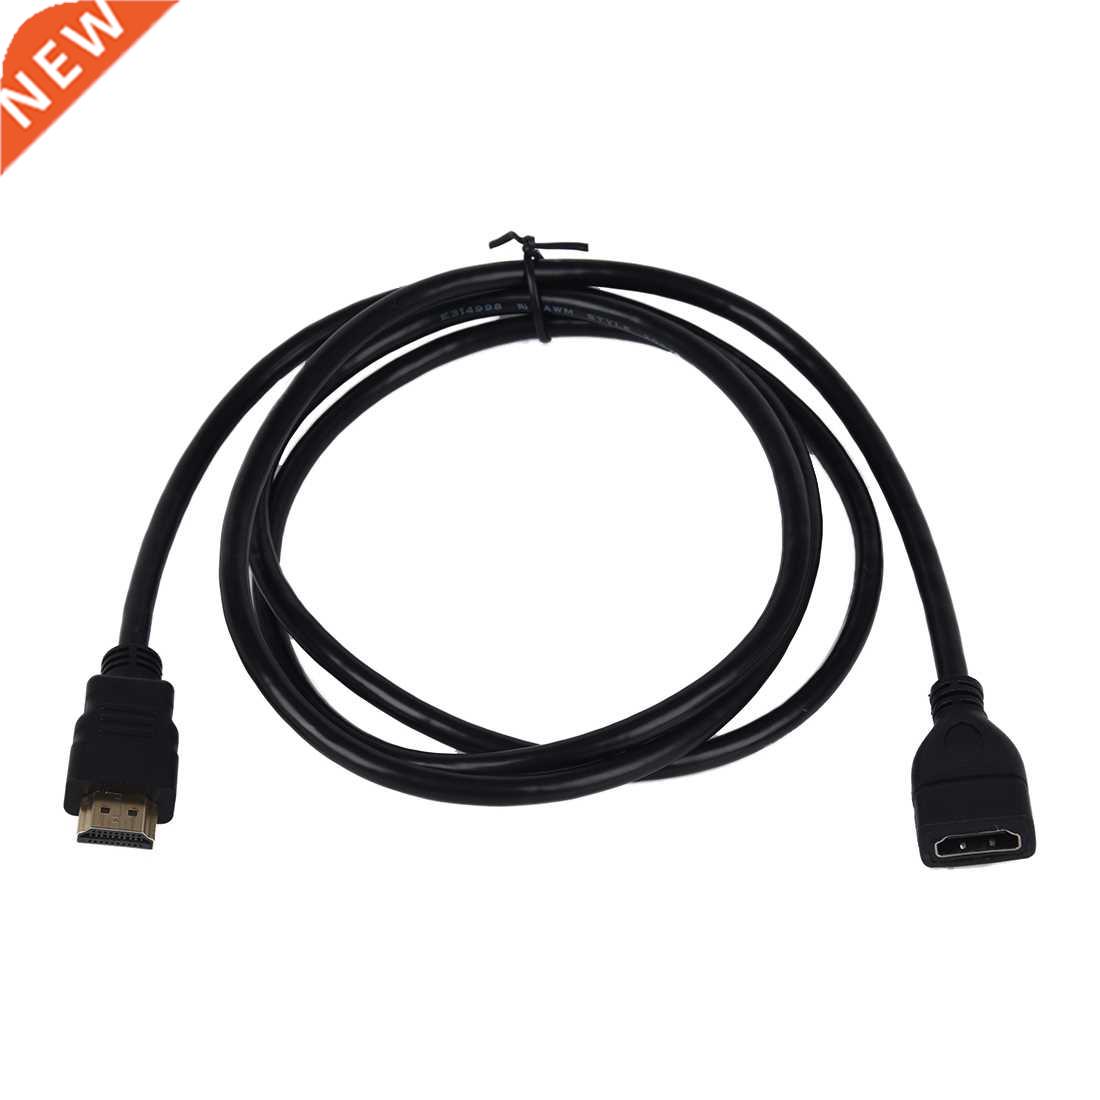 6-Feet HDMI 1.3 M/F Gold Extension Cable Link for HDTV